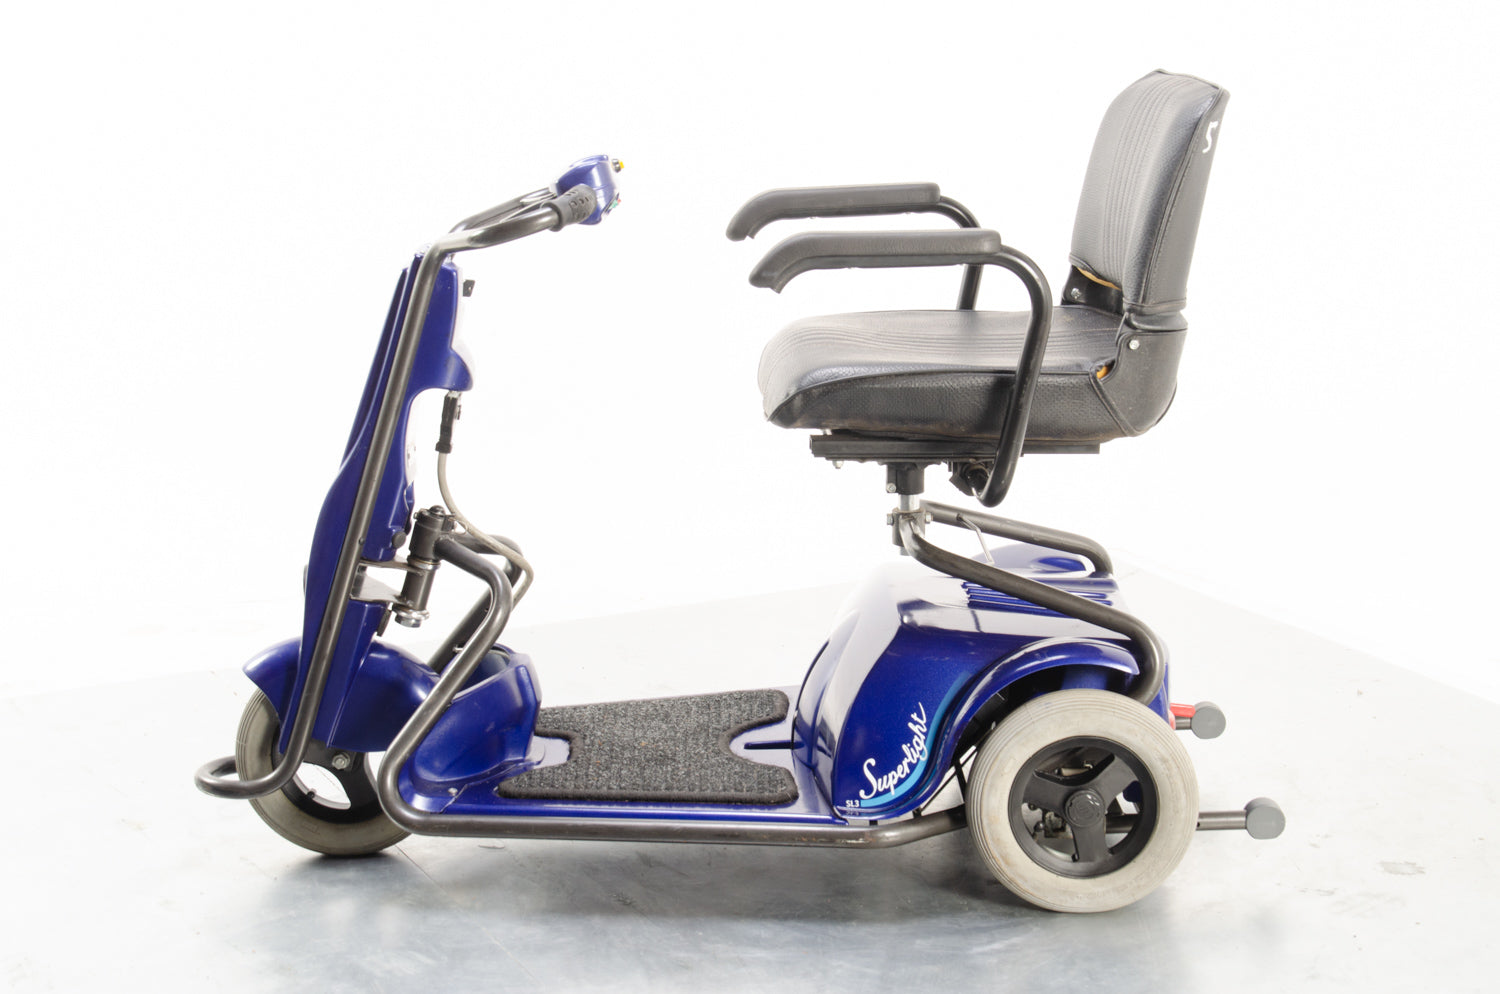 2006 TGA Superlight SL3 4mph Mobility Scooter Small Transportable Lightweight 3 Wheel